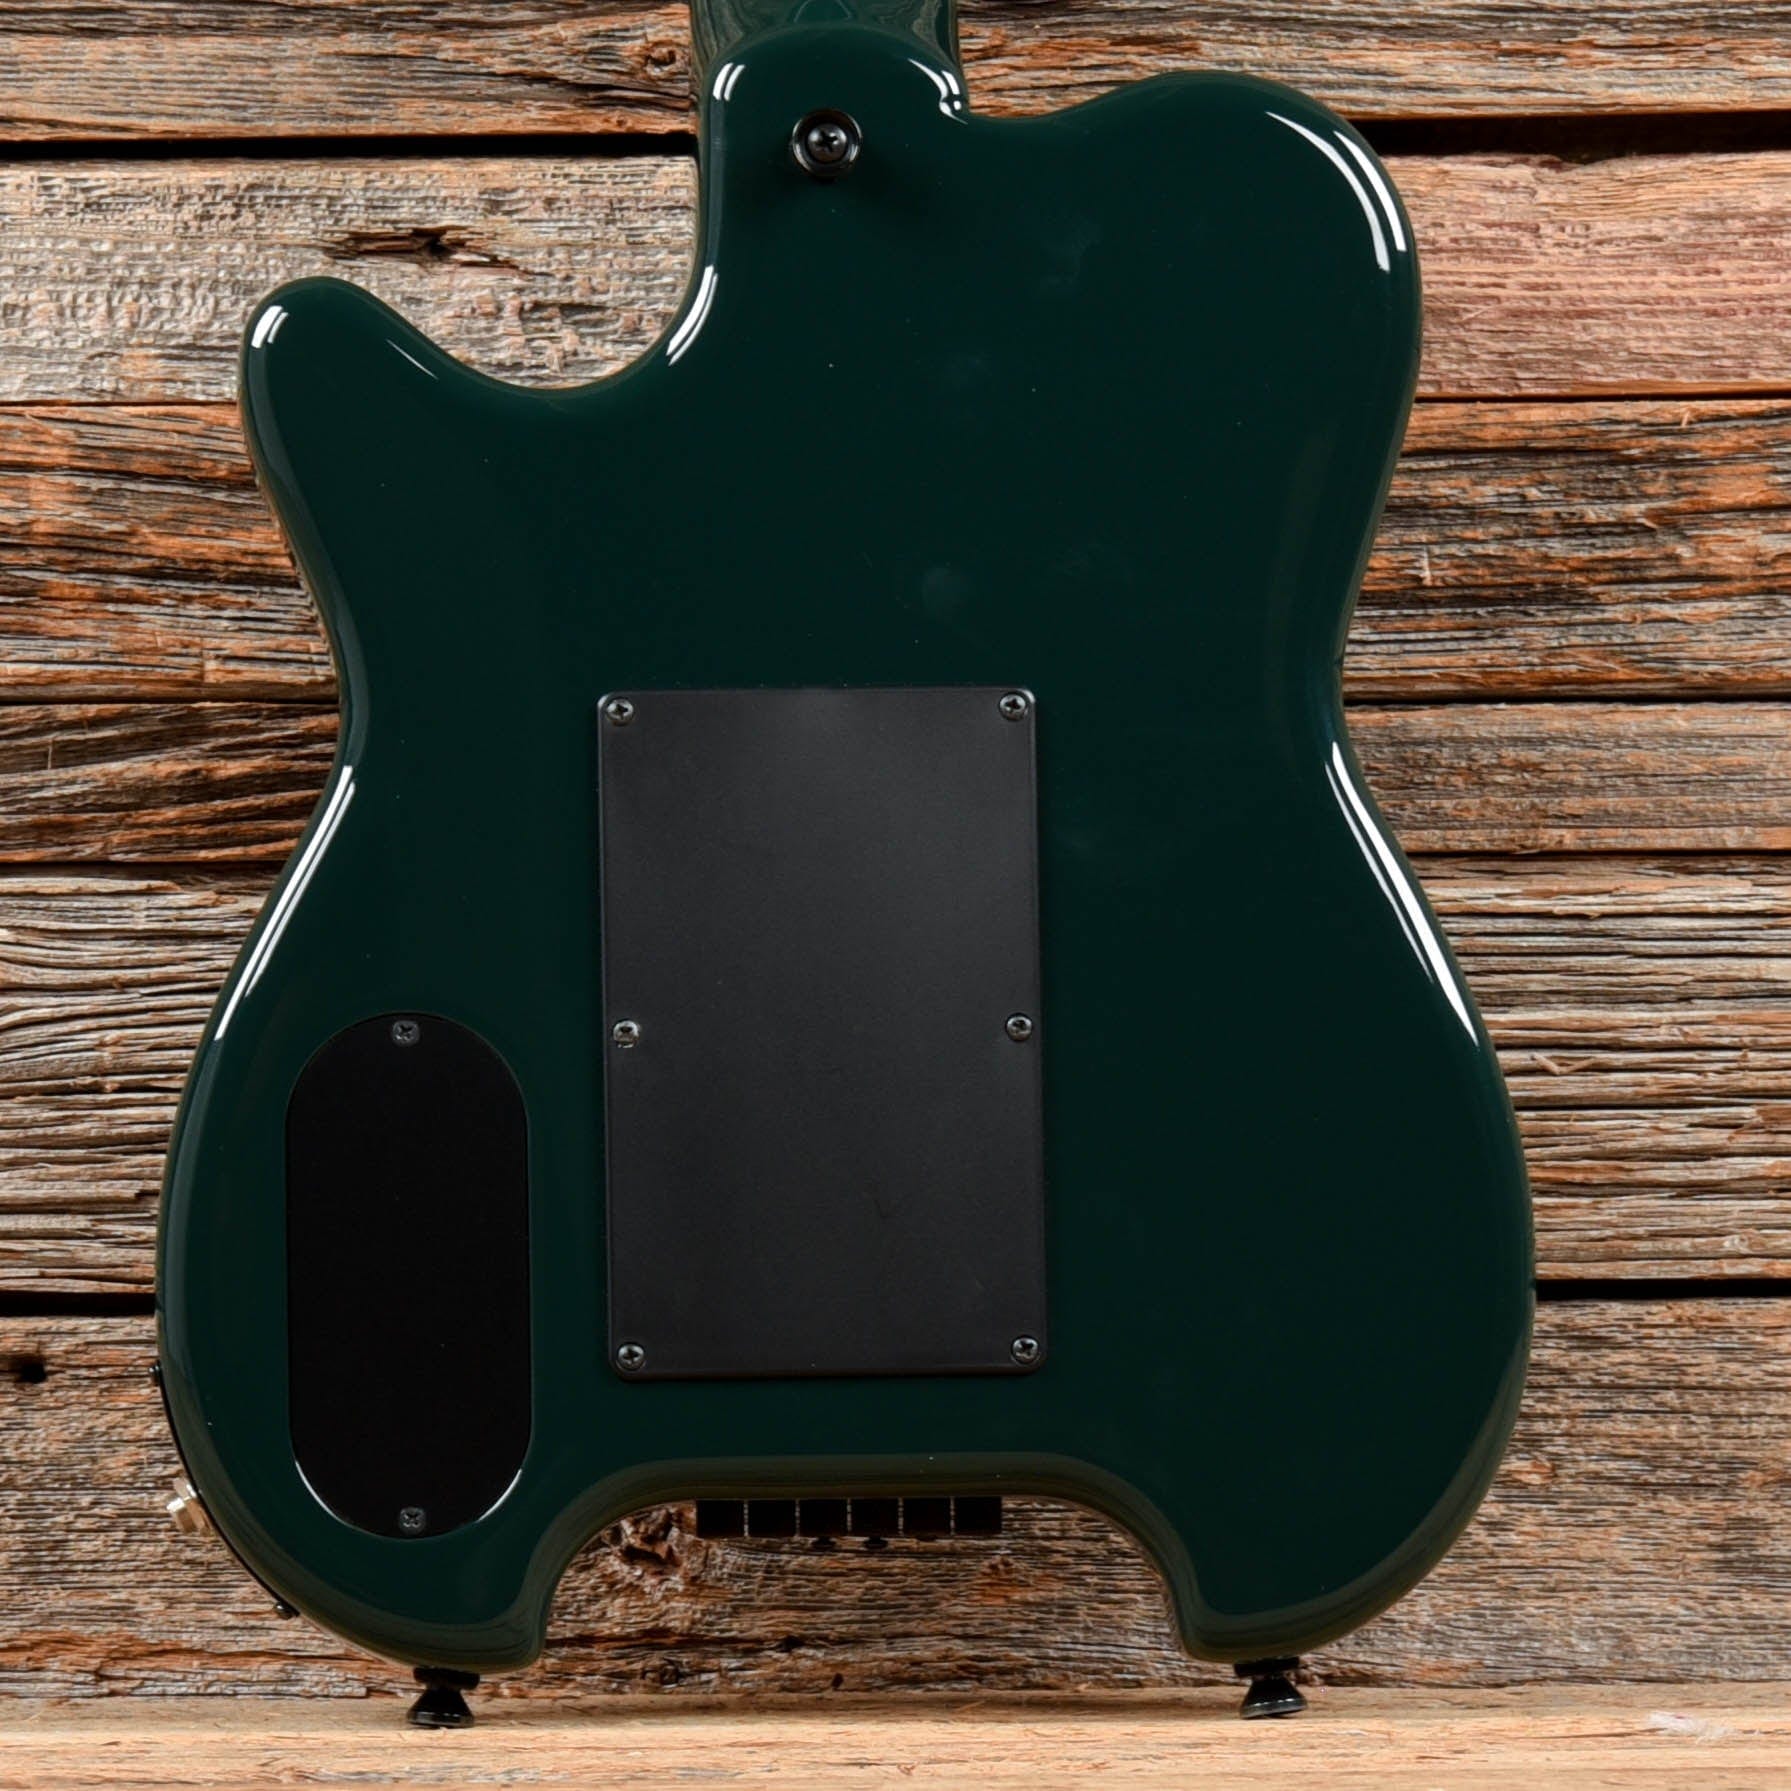 Kiesel HH2 Green Electric Guitars / Solid Body